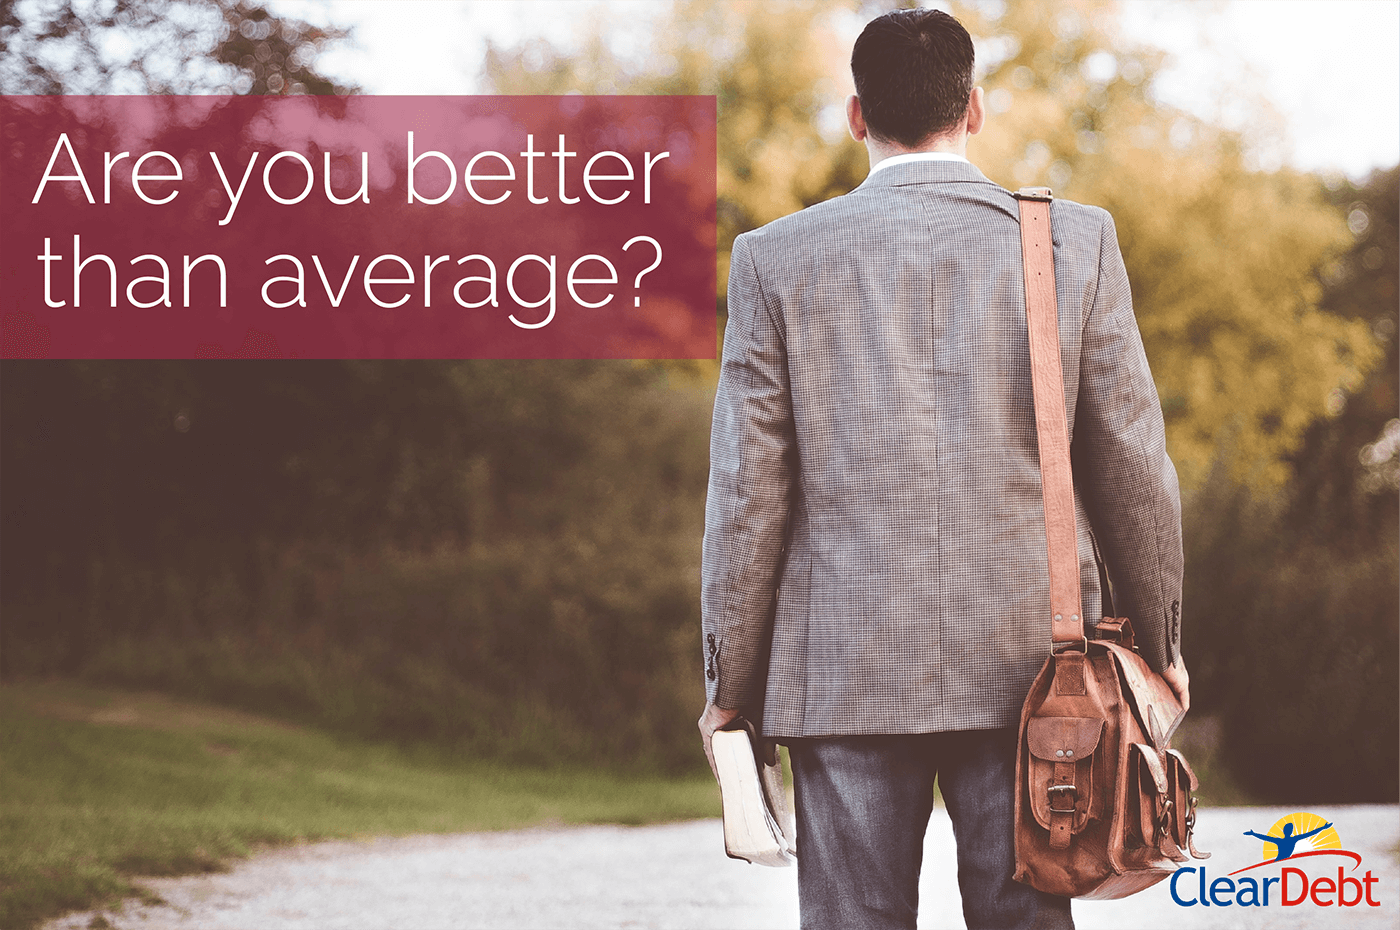 Are you better than average?